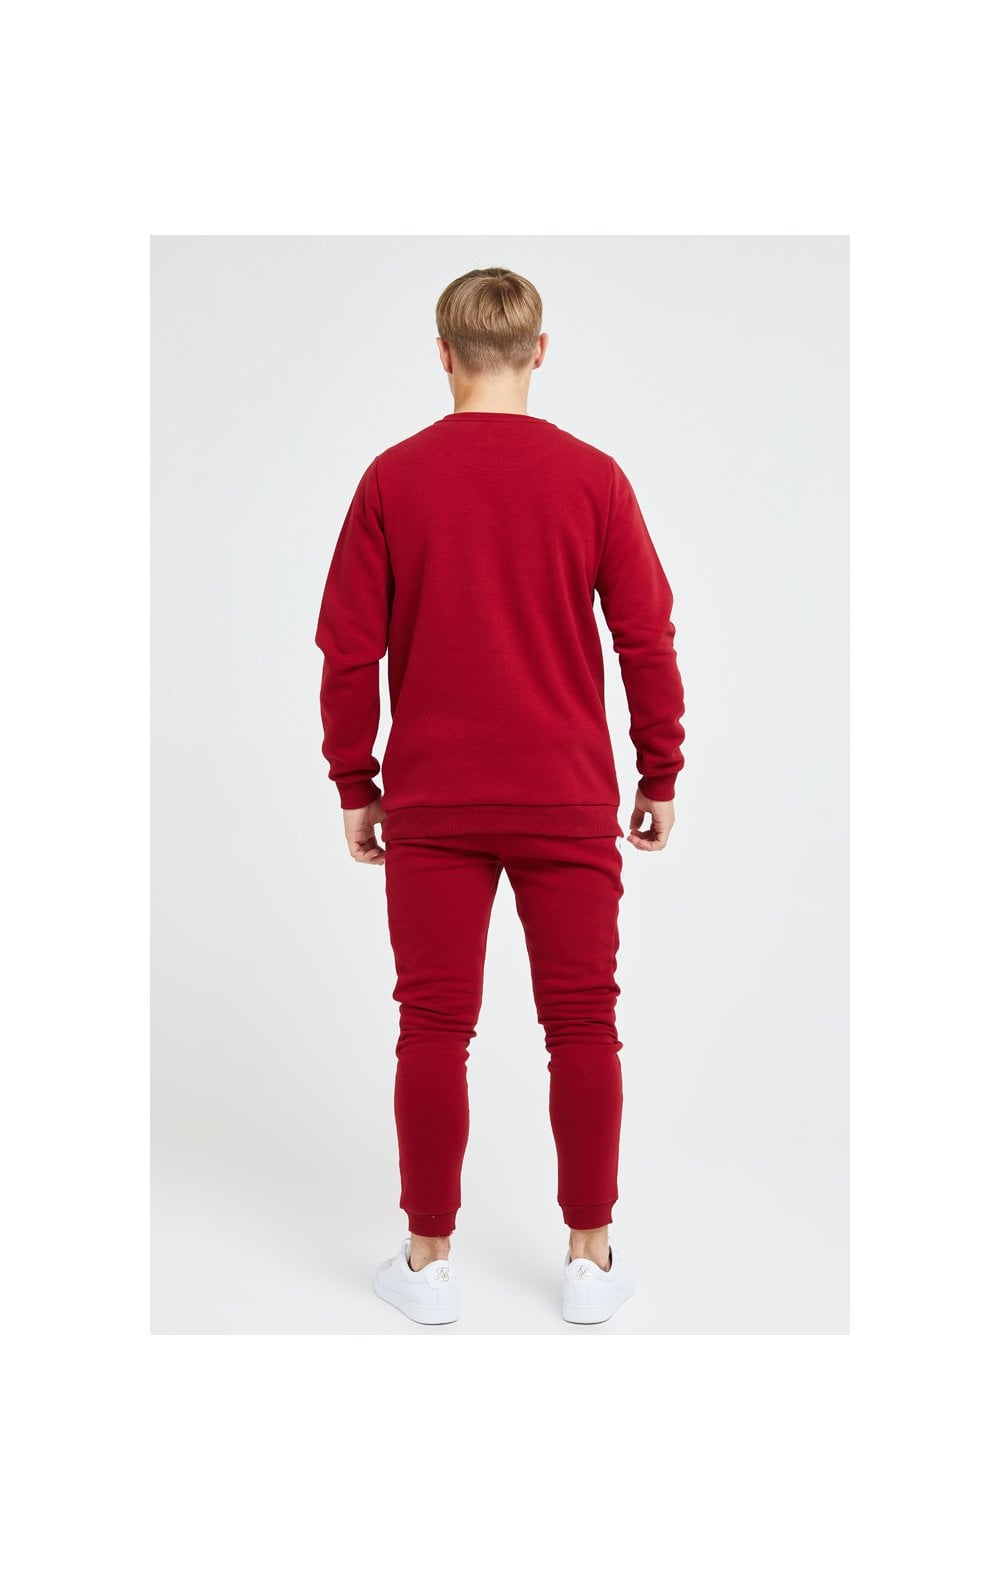 Illusive London Divergence Crew Sweater - Red & Pink (4)